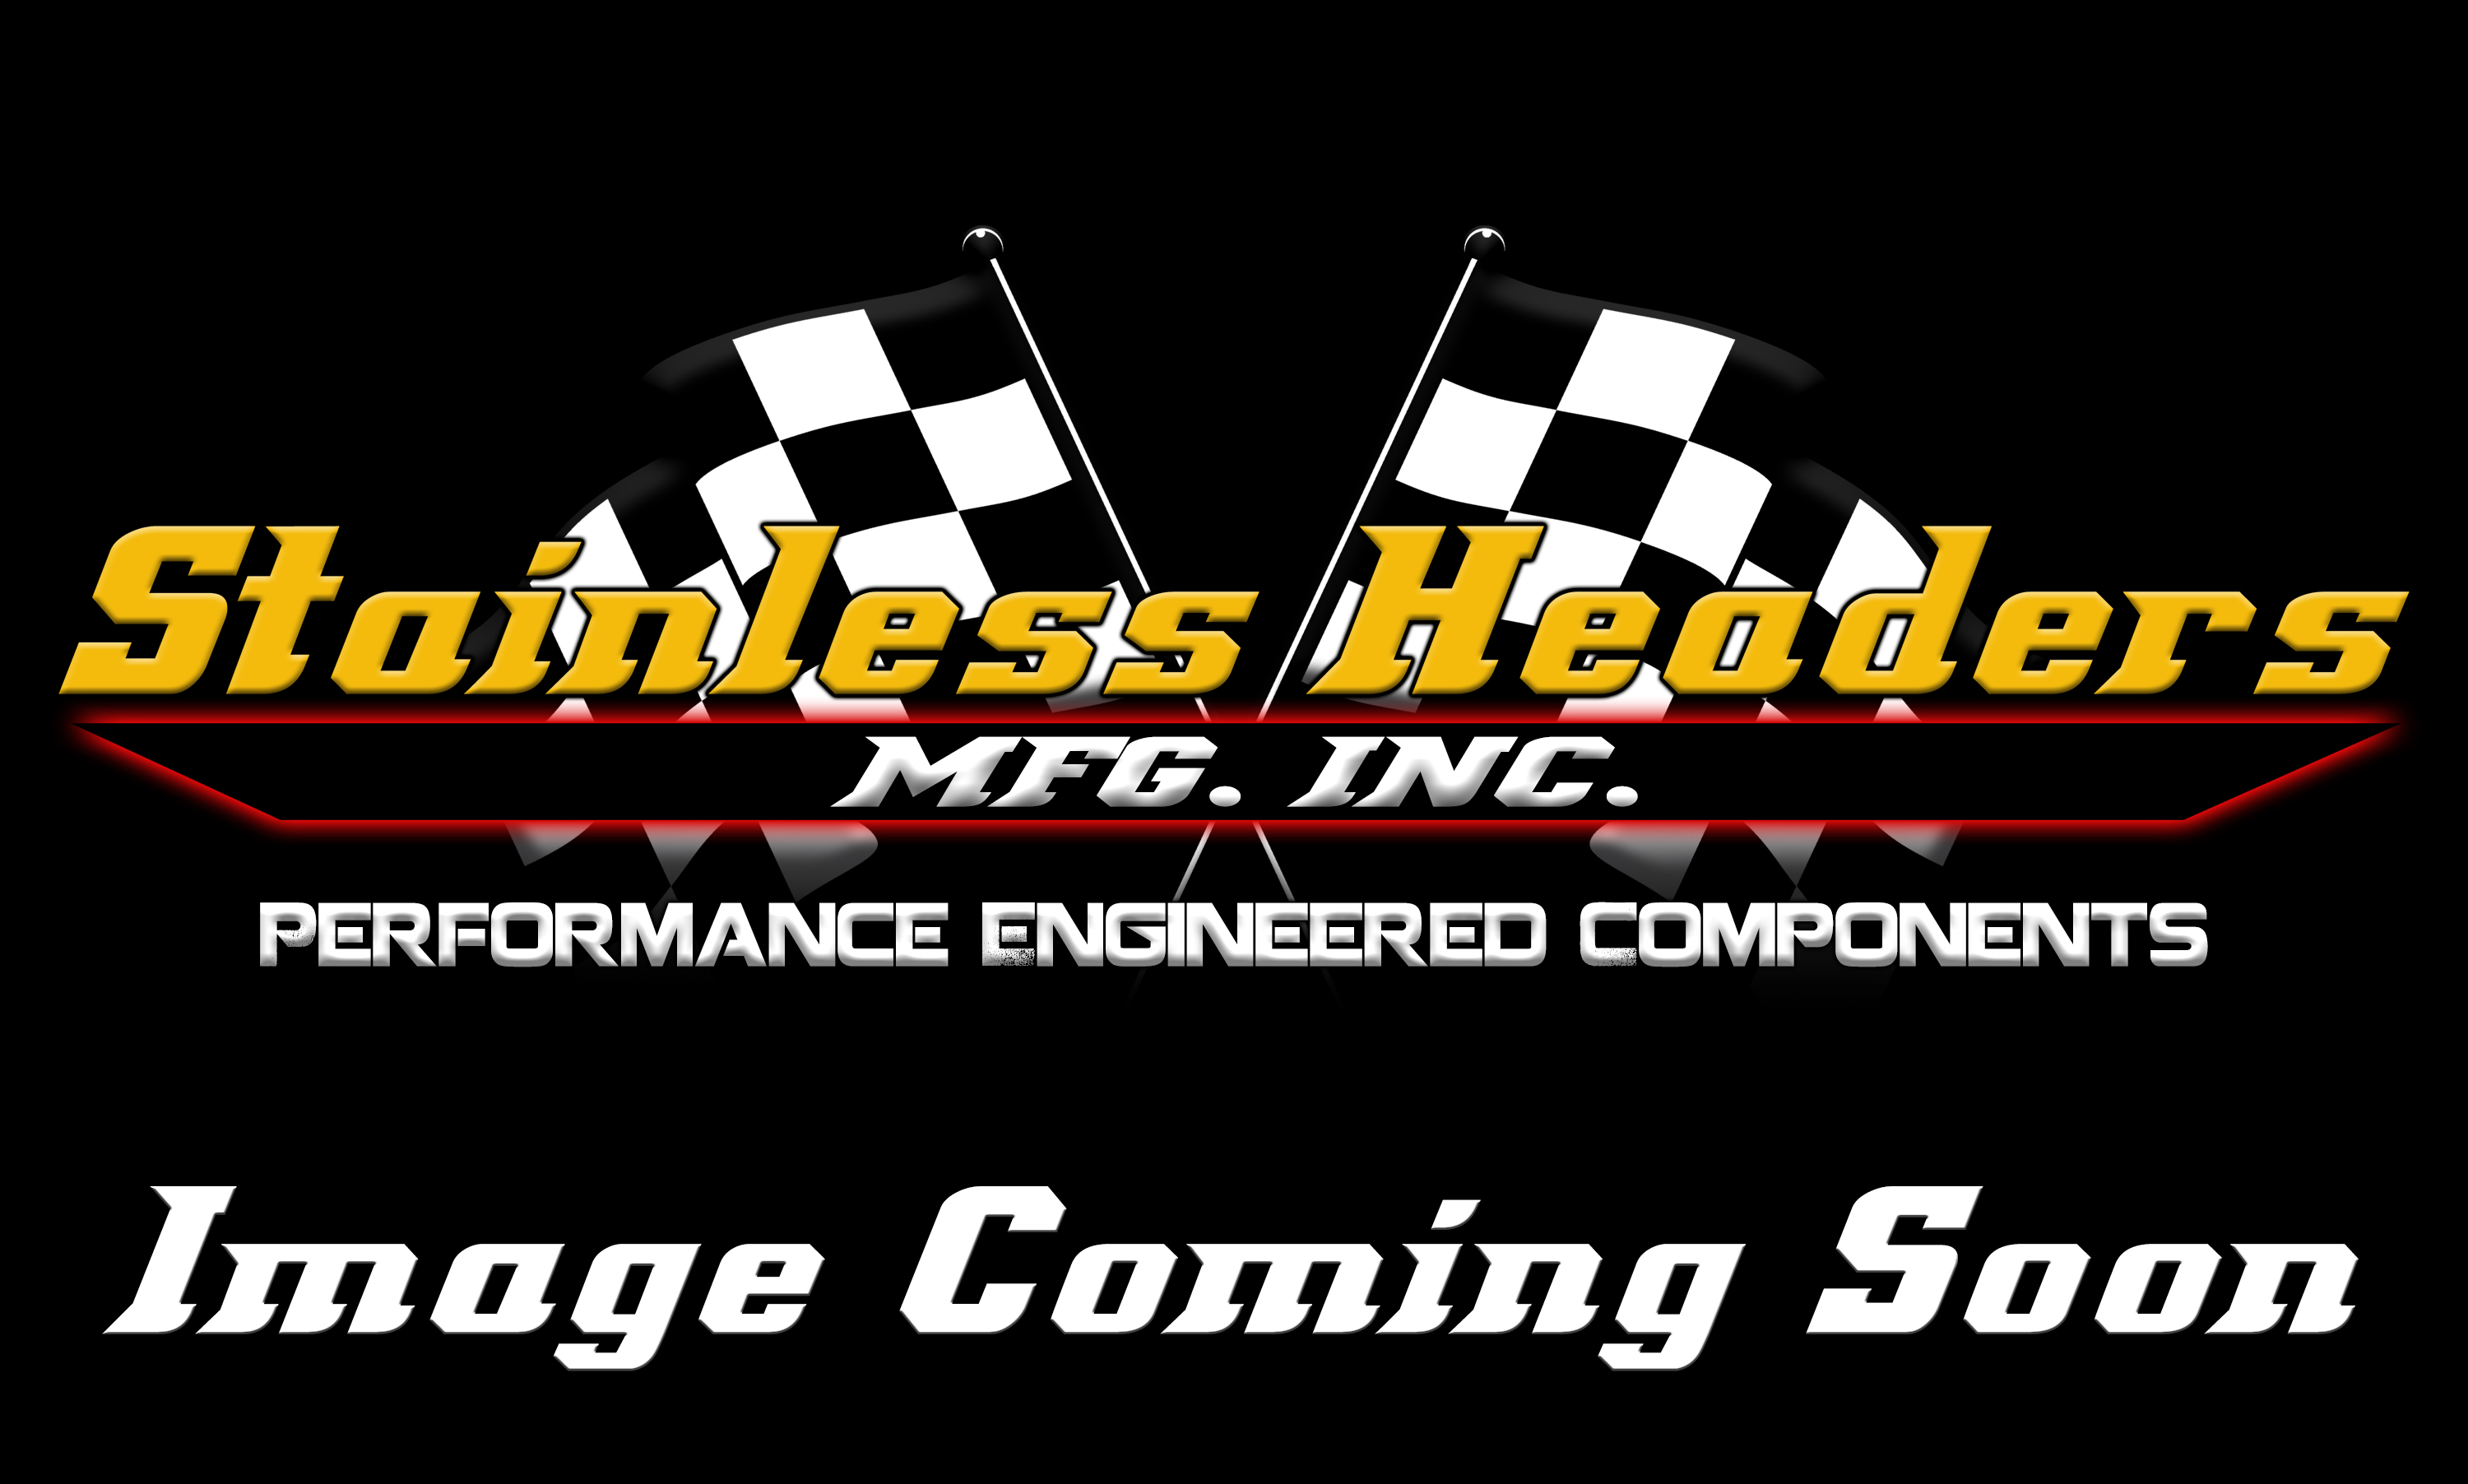 Stainless Headers - 1 1/2" Primary 8 into 1 Performance Merge Collector-16ga 321ss